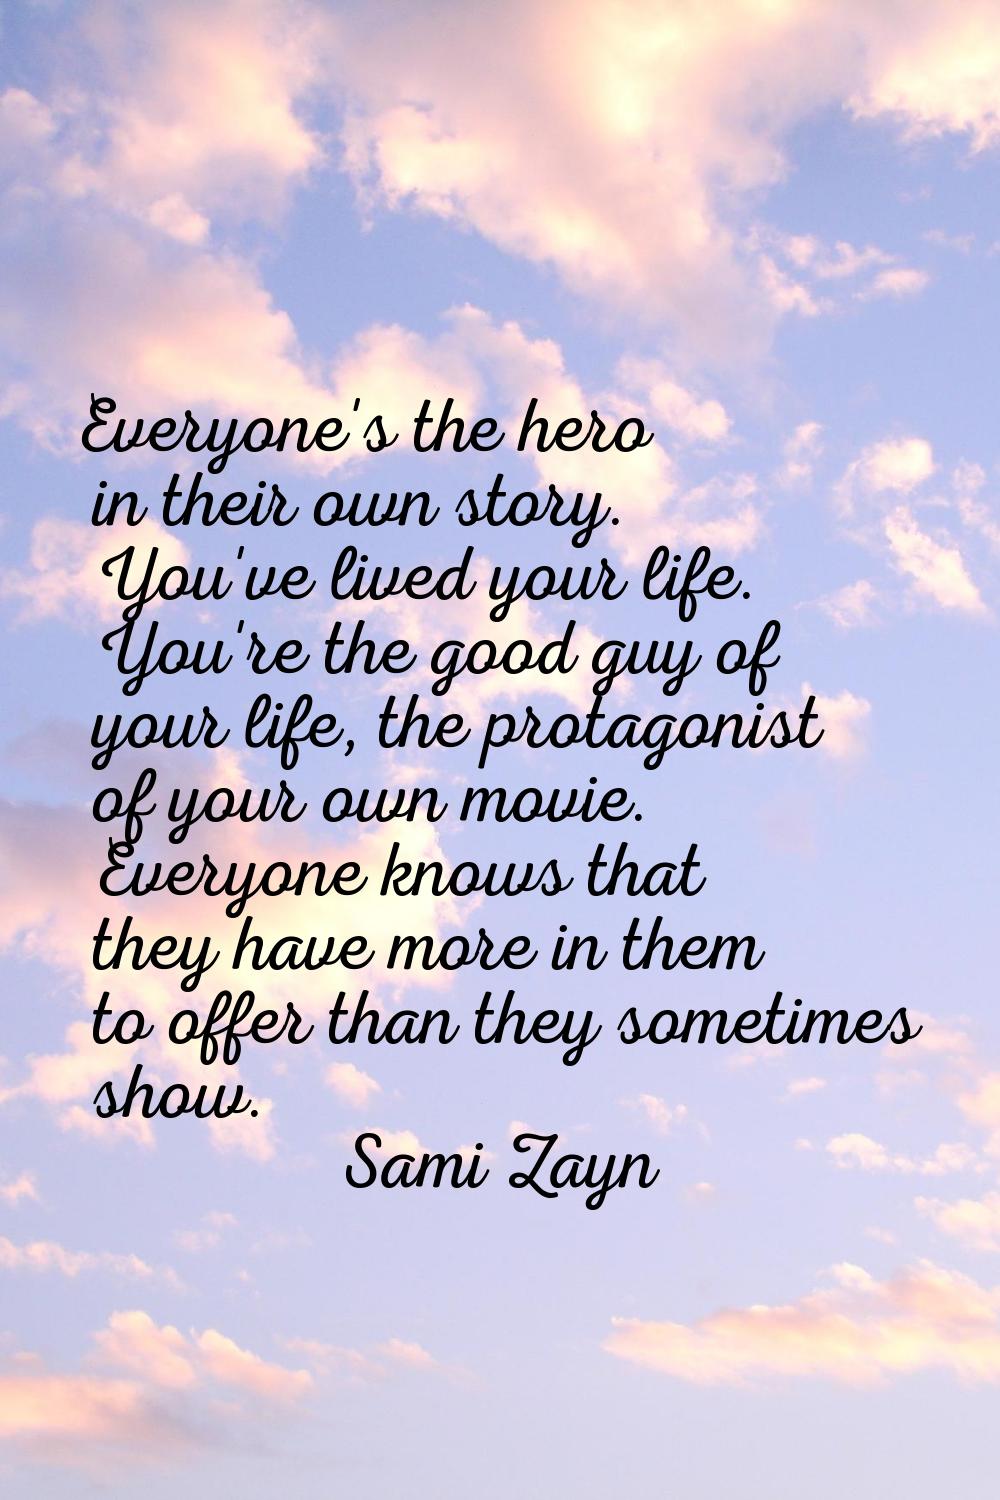 Everyone's the hero in their own story. You've lived your life. You're the good guy of your life, t